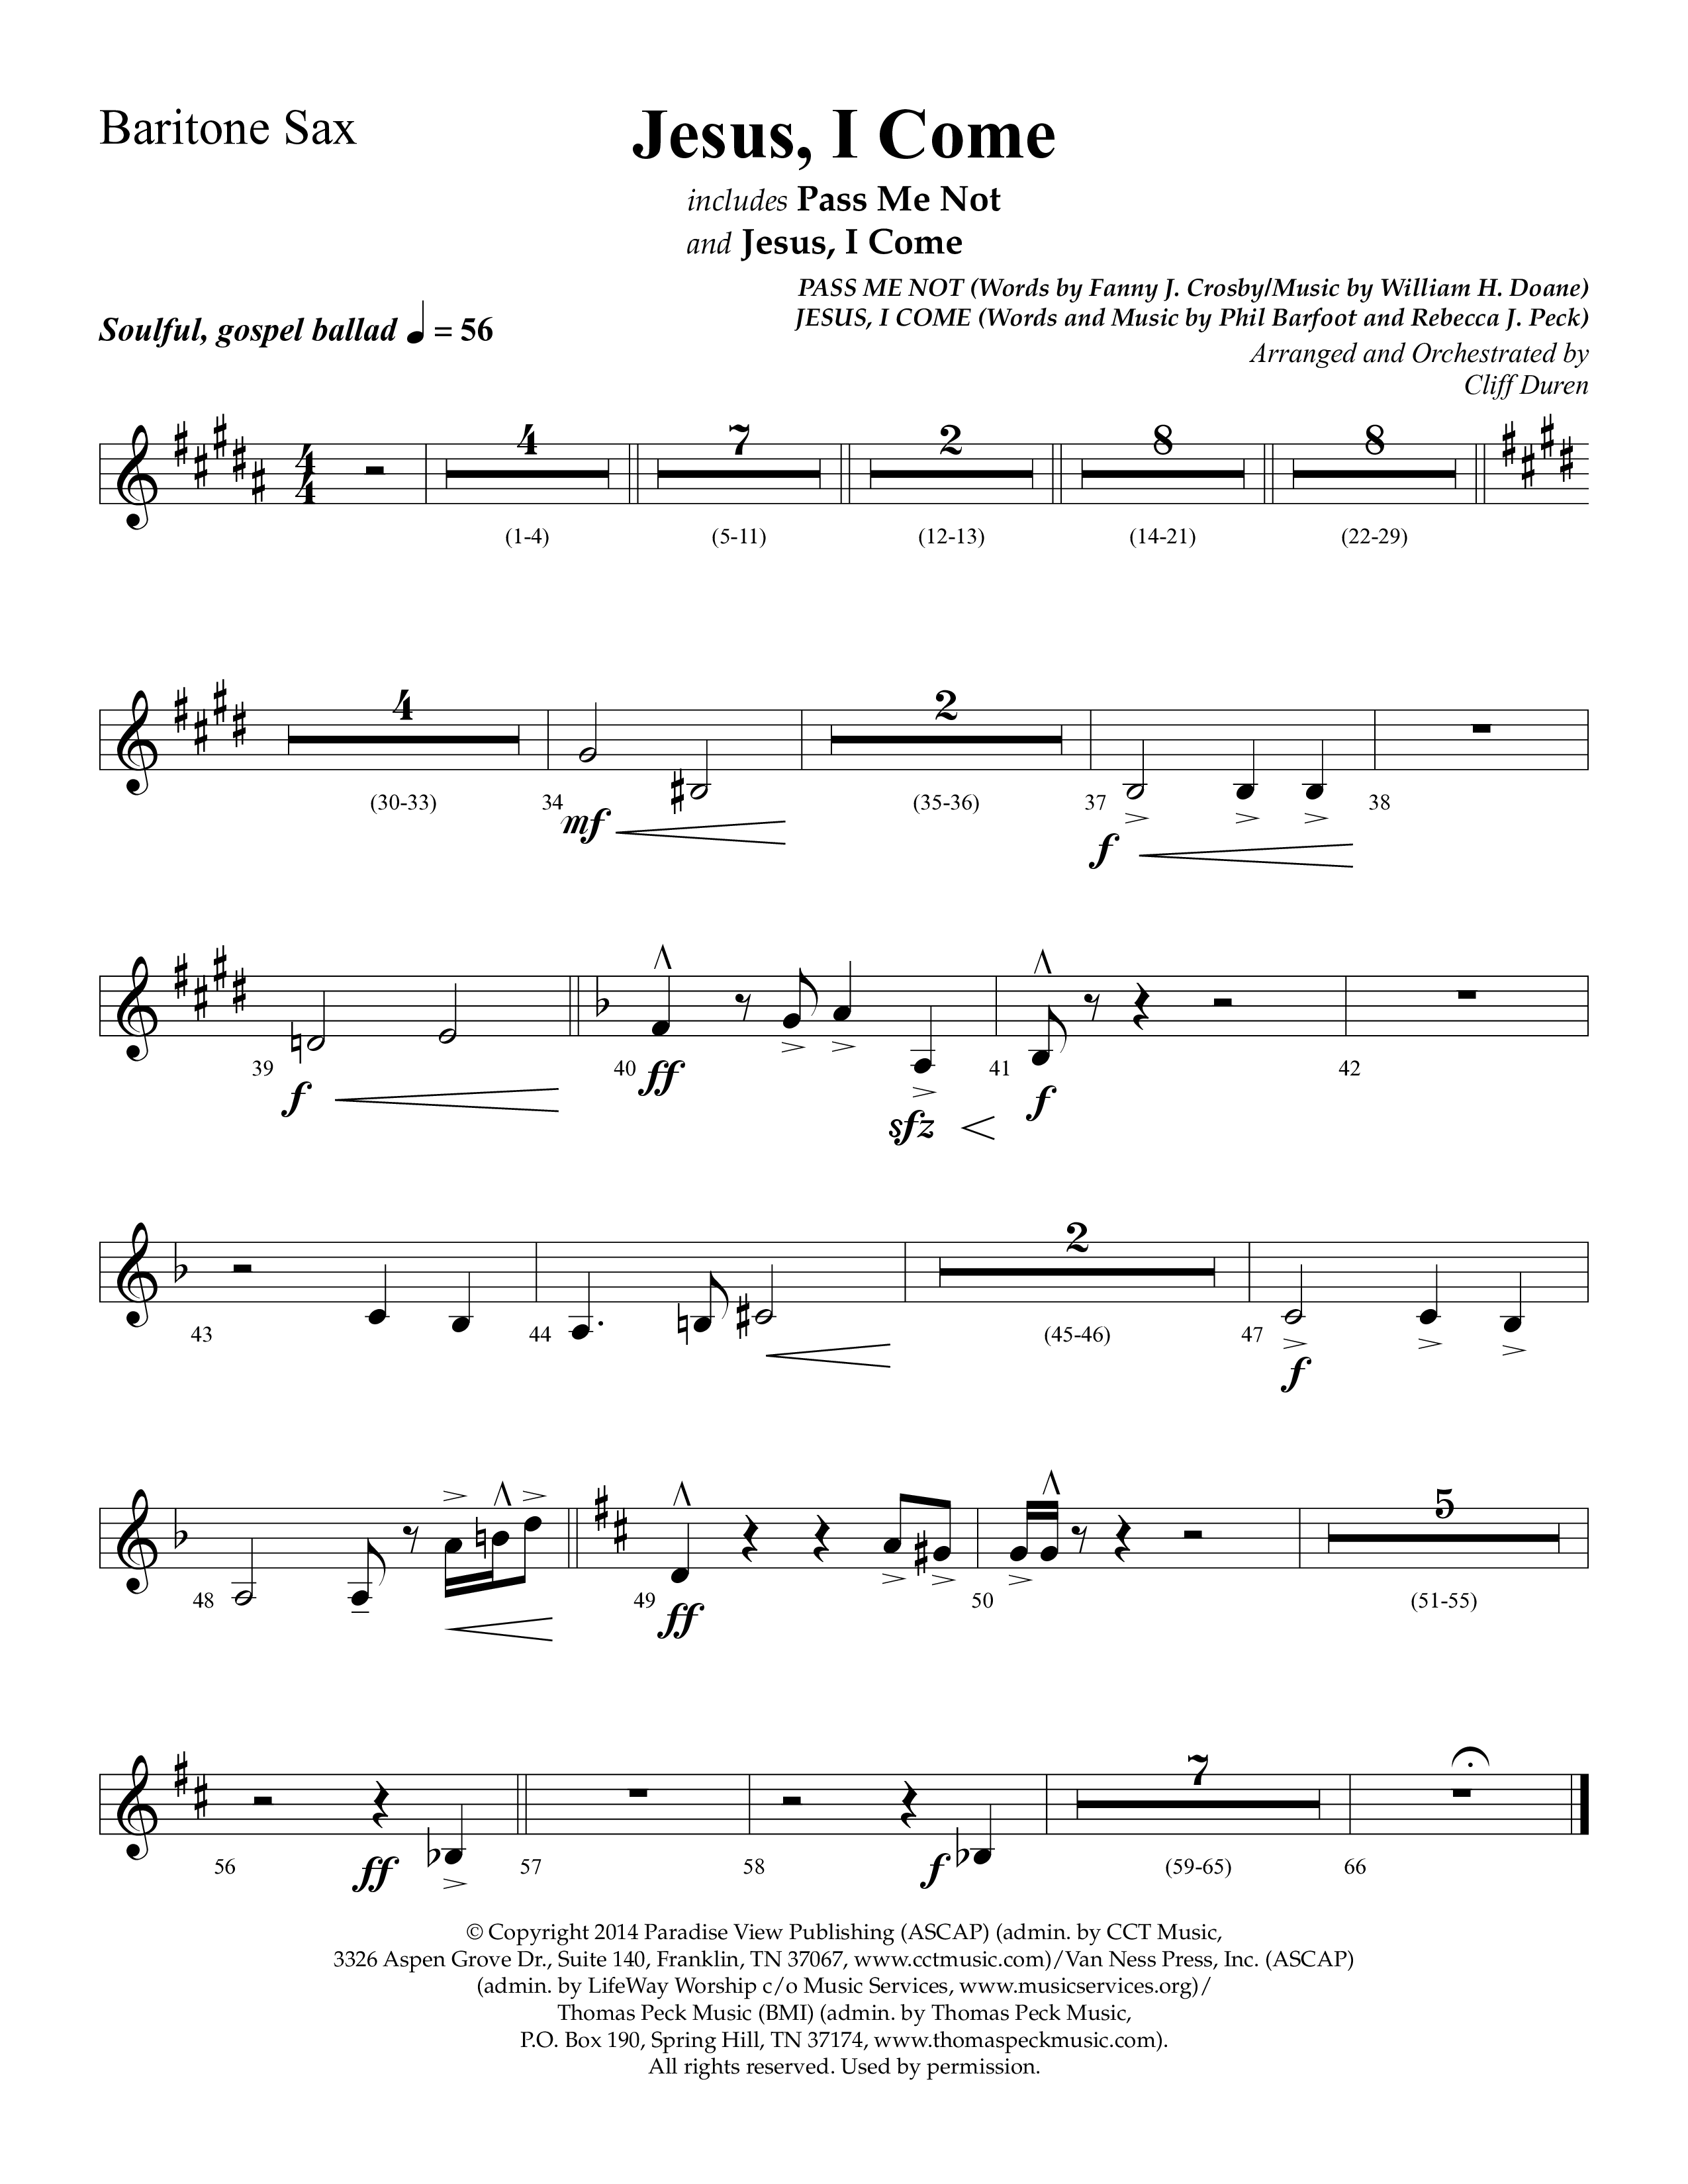 Jesus I Come (with Pass Me Not) (Choral Anthem SATB) Bari Sax (Lifeway Choral / Arr. Cliff Duren)